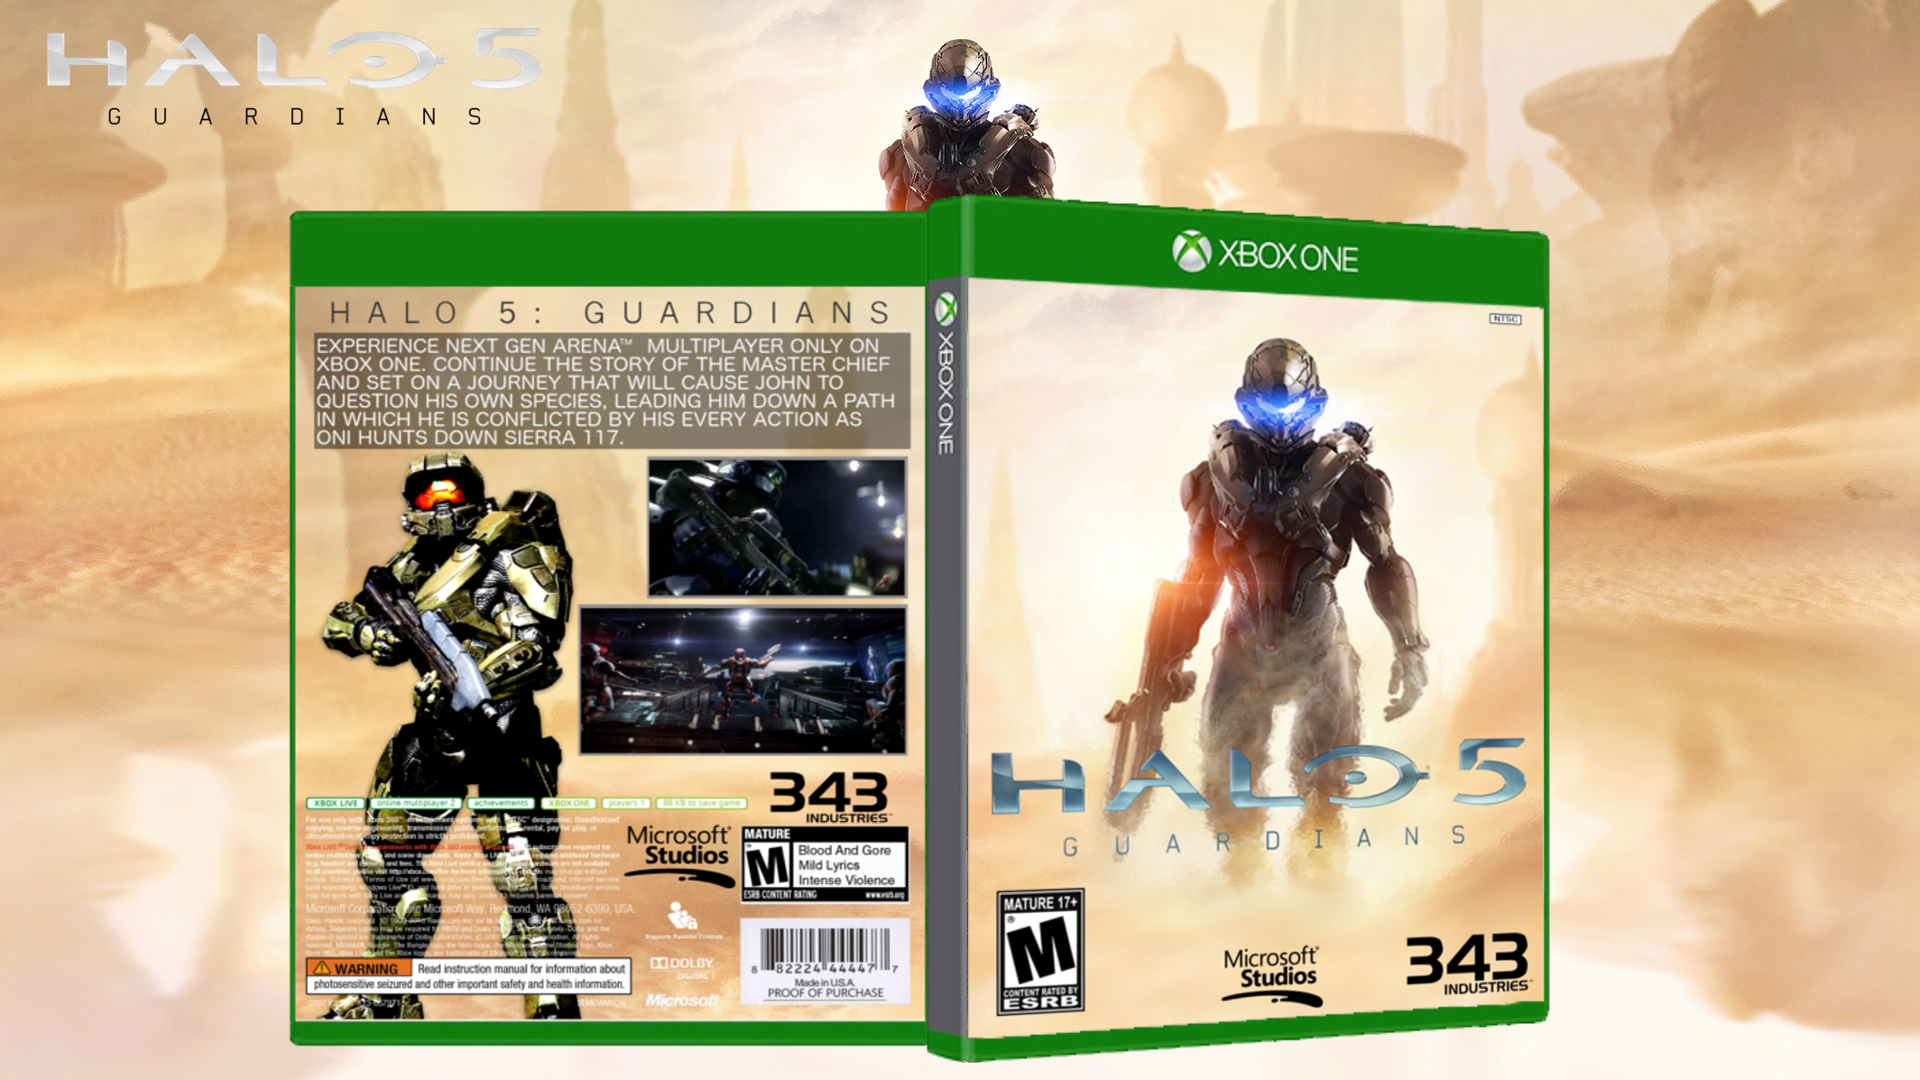 Halo 5: Guardians box cover